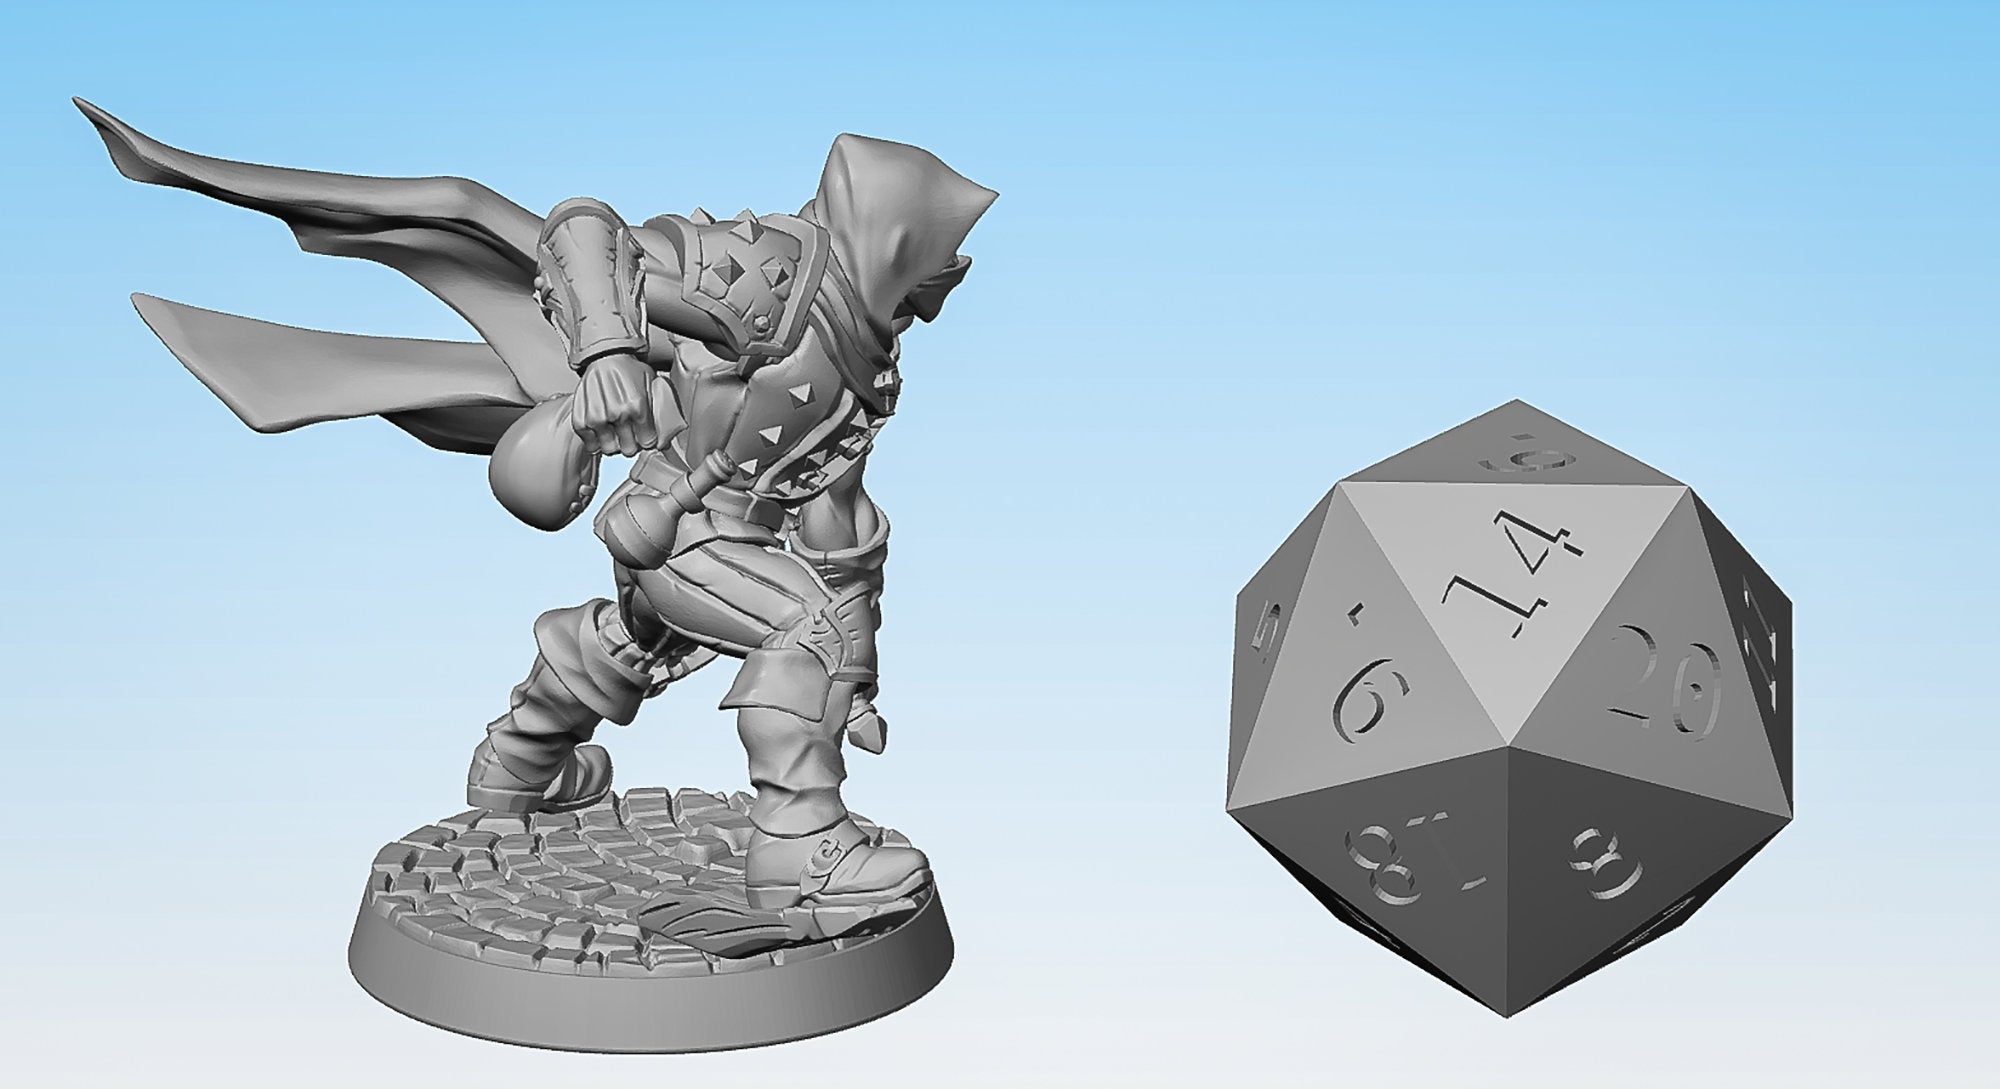 BANDIT THIEF "Adept Thief A"-Role Playing Miniatures